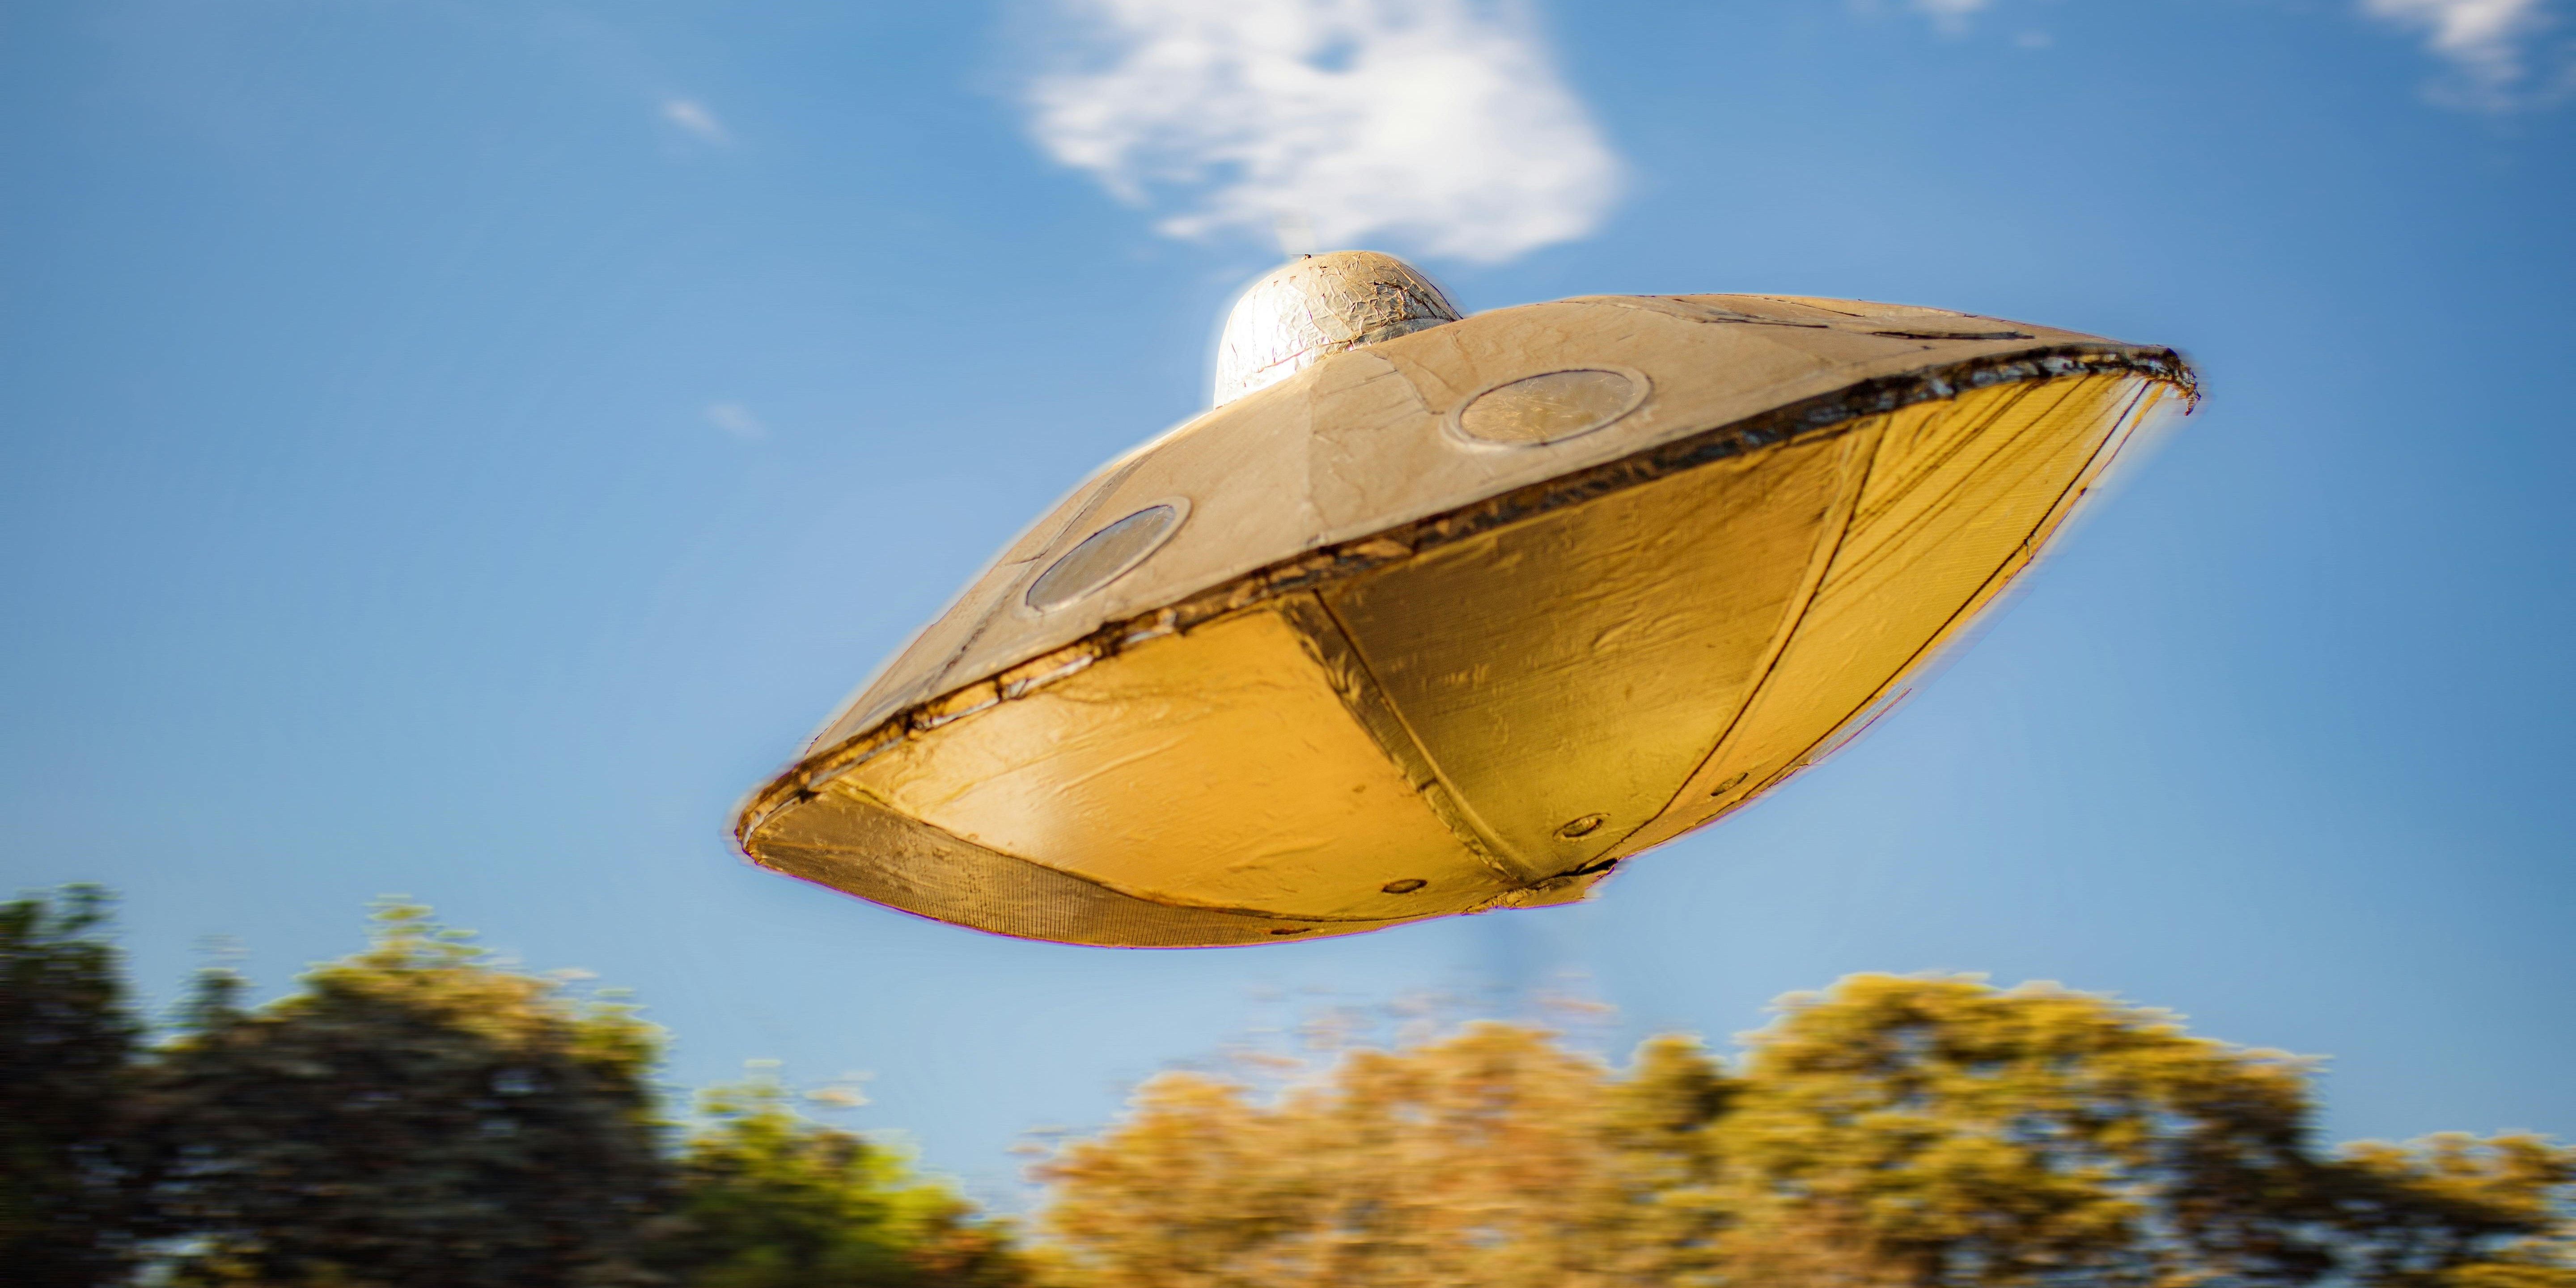 An image of a UFO flying above trees in a daytime sky